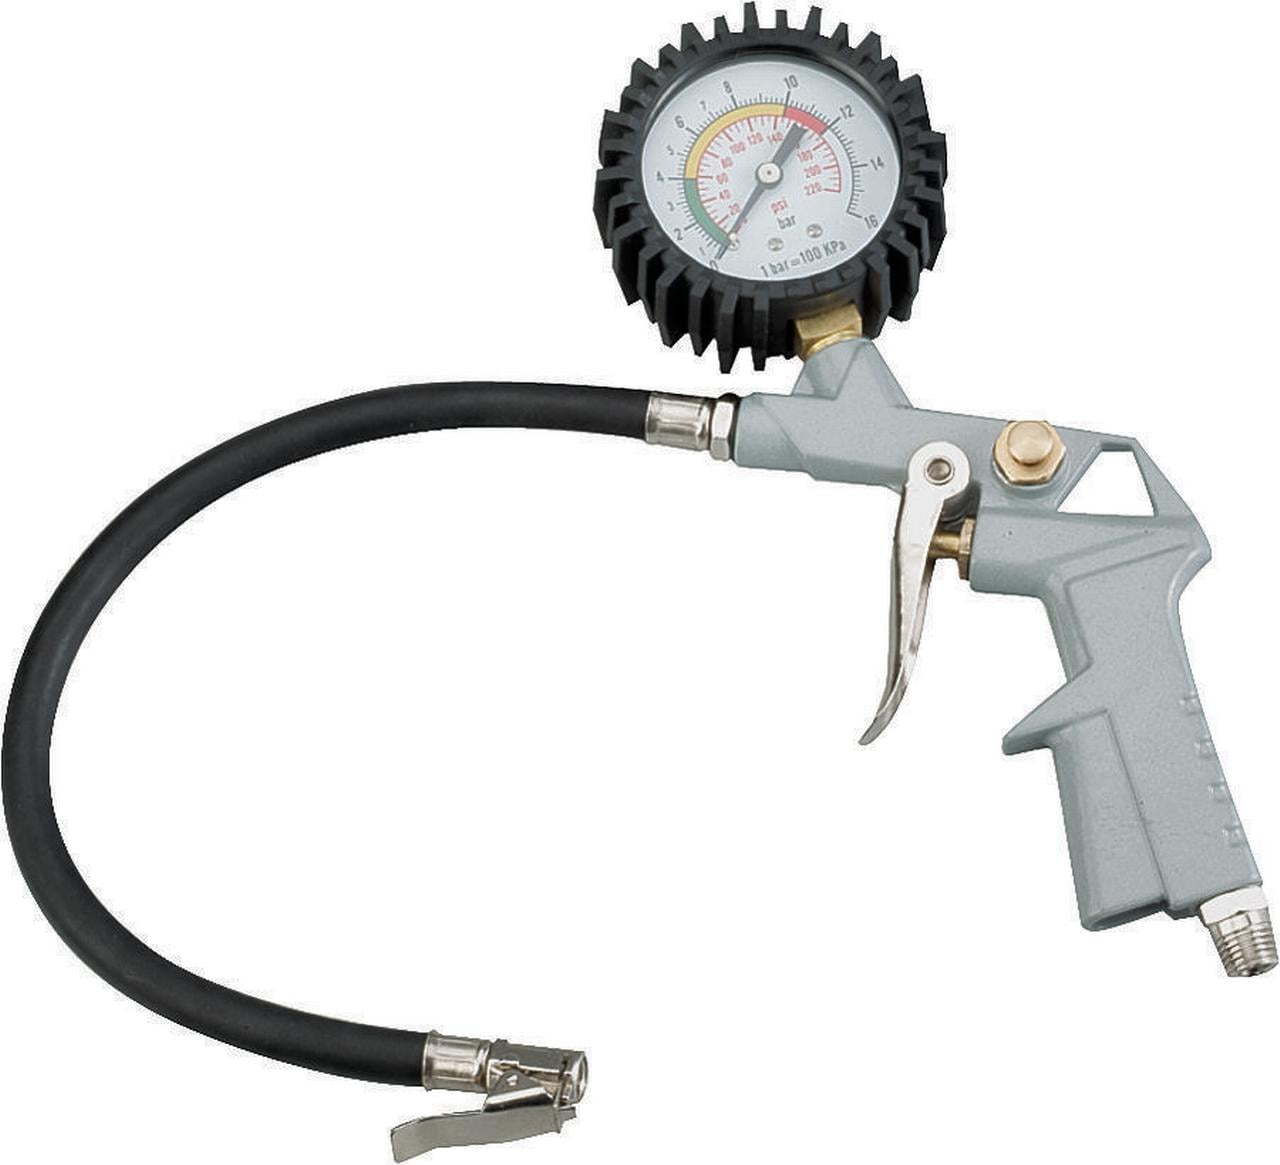 PNEUMICS PRO 220 PSI LOCK ON TIRE CHUCK INFLATOR WITH AIR PRESSURE GAUGE 